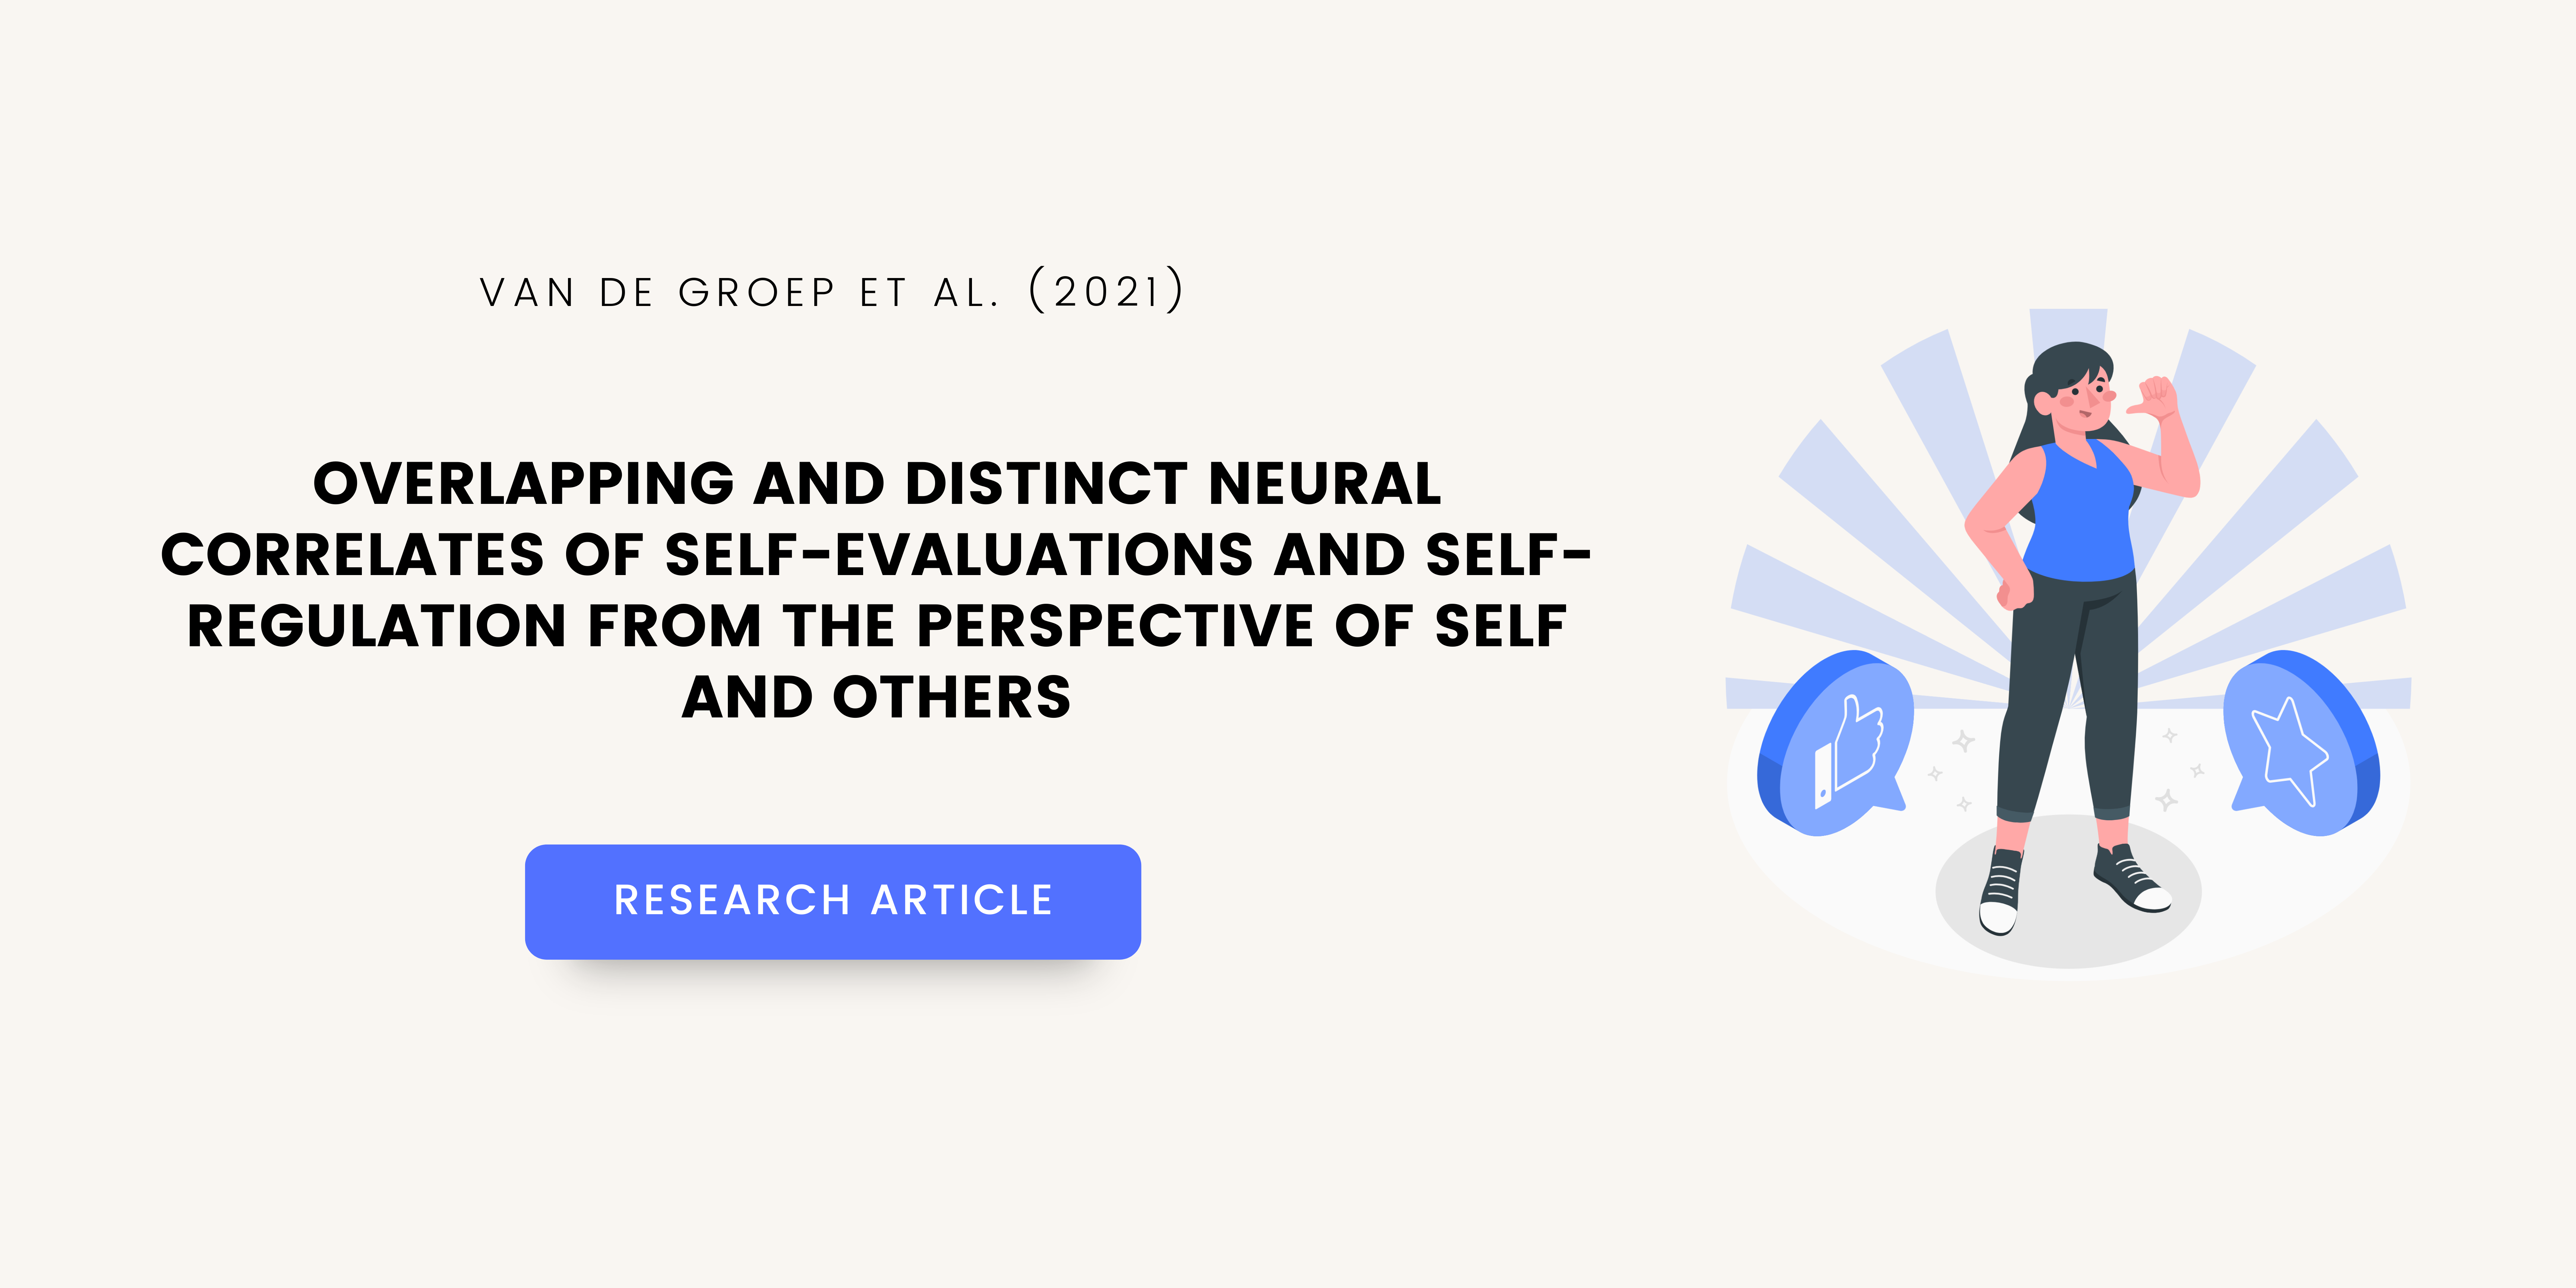 Overlapping and distinct neural correlates of self-evaluations and self-regulation from the perspective of self and others